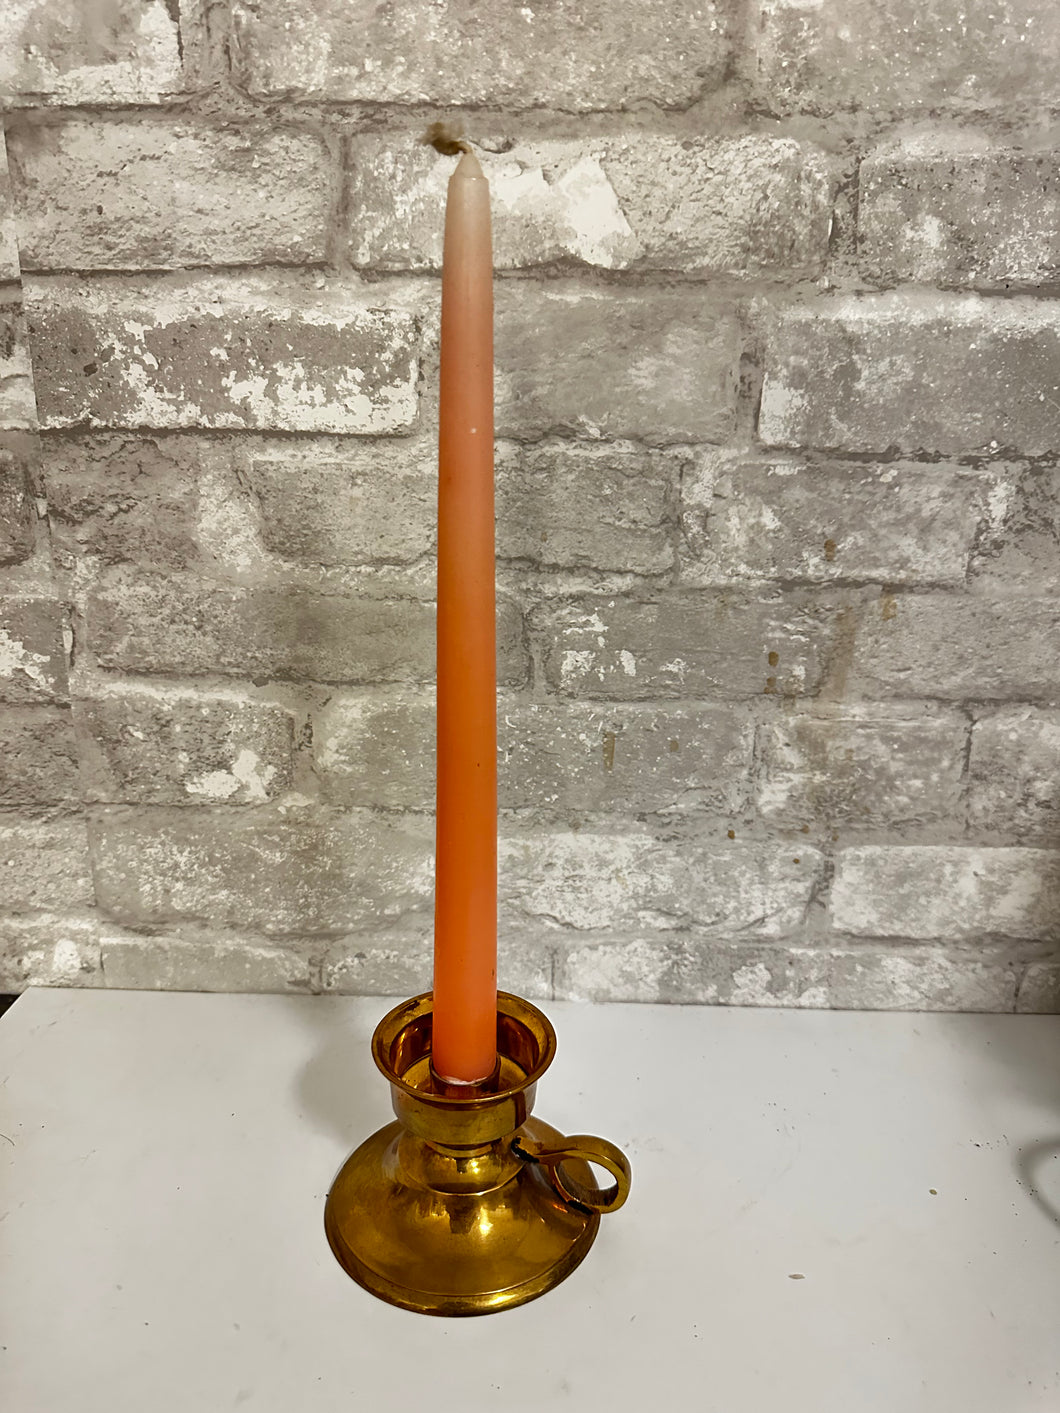 Vintage Brass Candle Stick Holders with Handle 3 inches tall